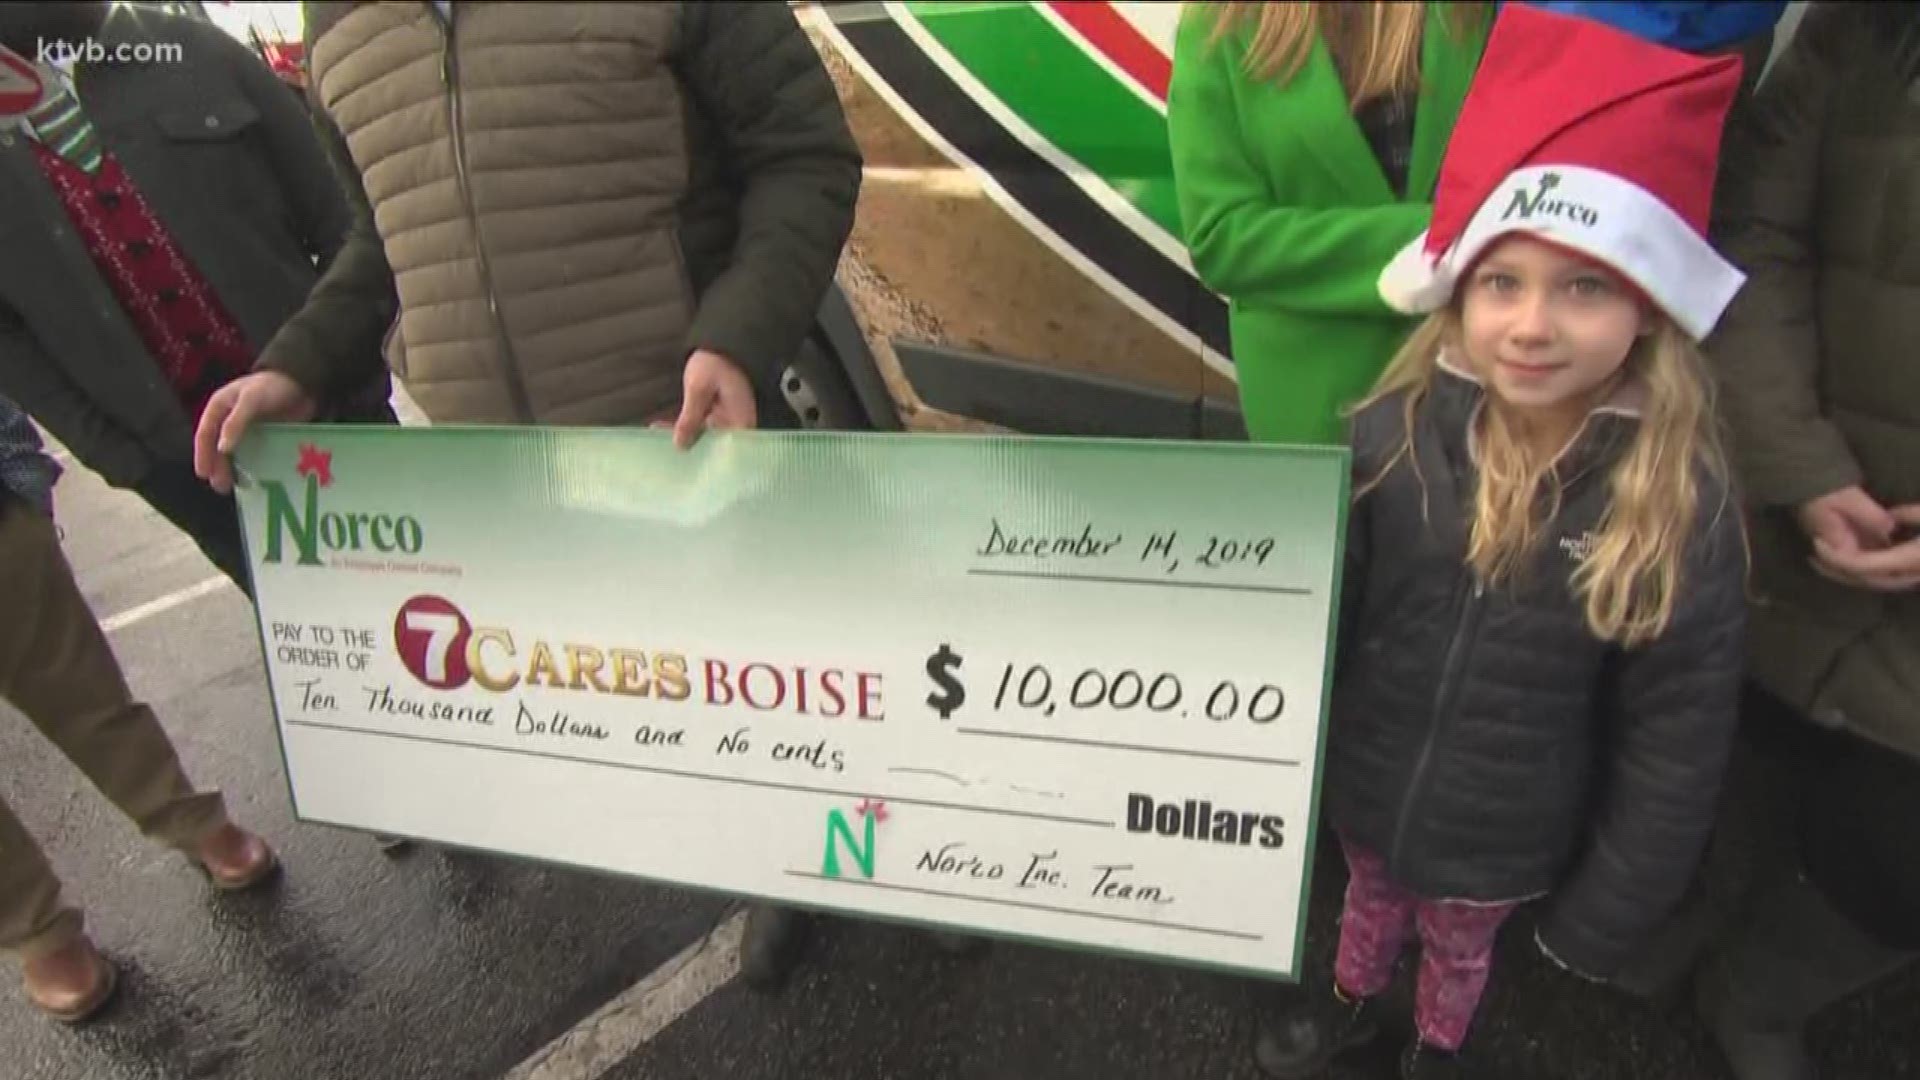 Norco, another Company That Cares, says they love giving back to the communities they serve.